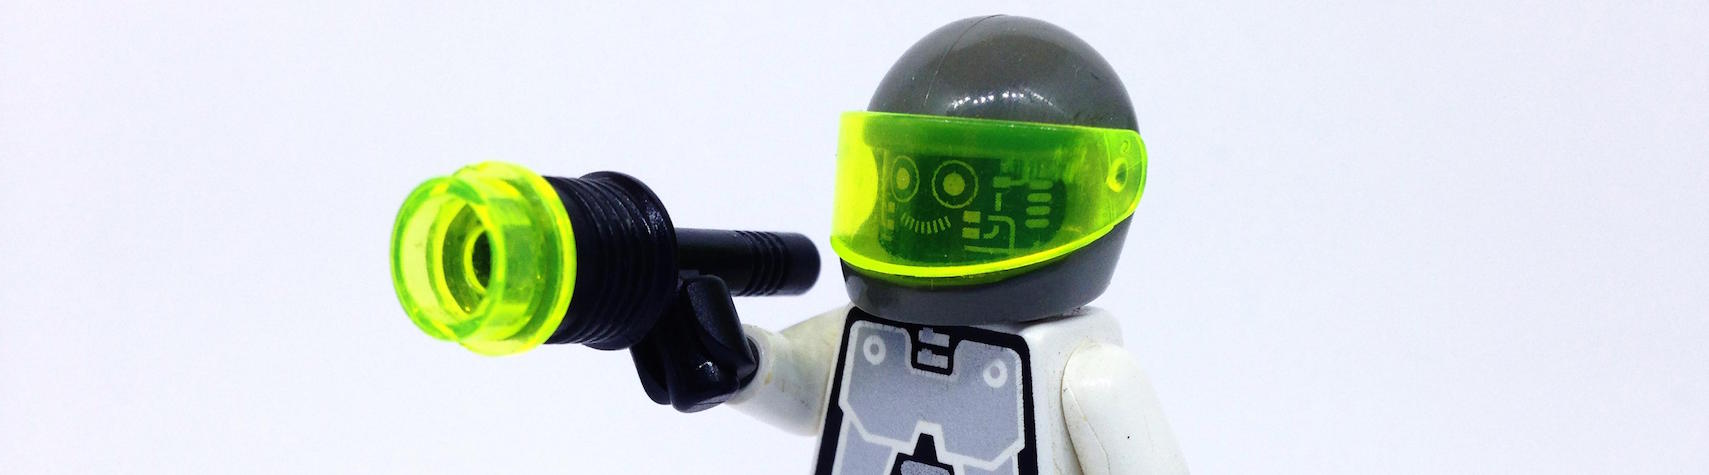 Do you have tiny ninja robots doing email marketing for you? We do.